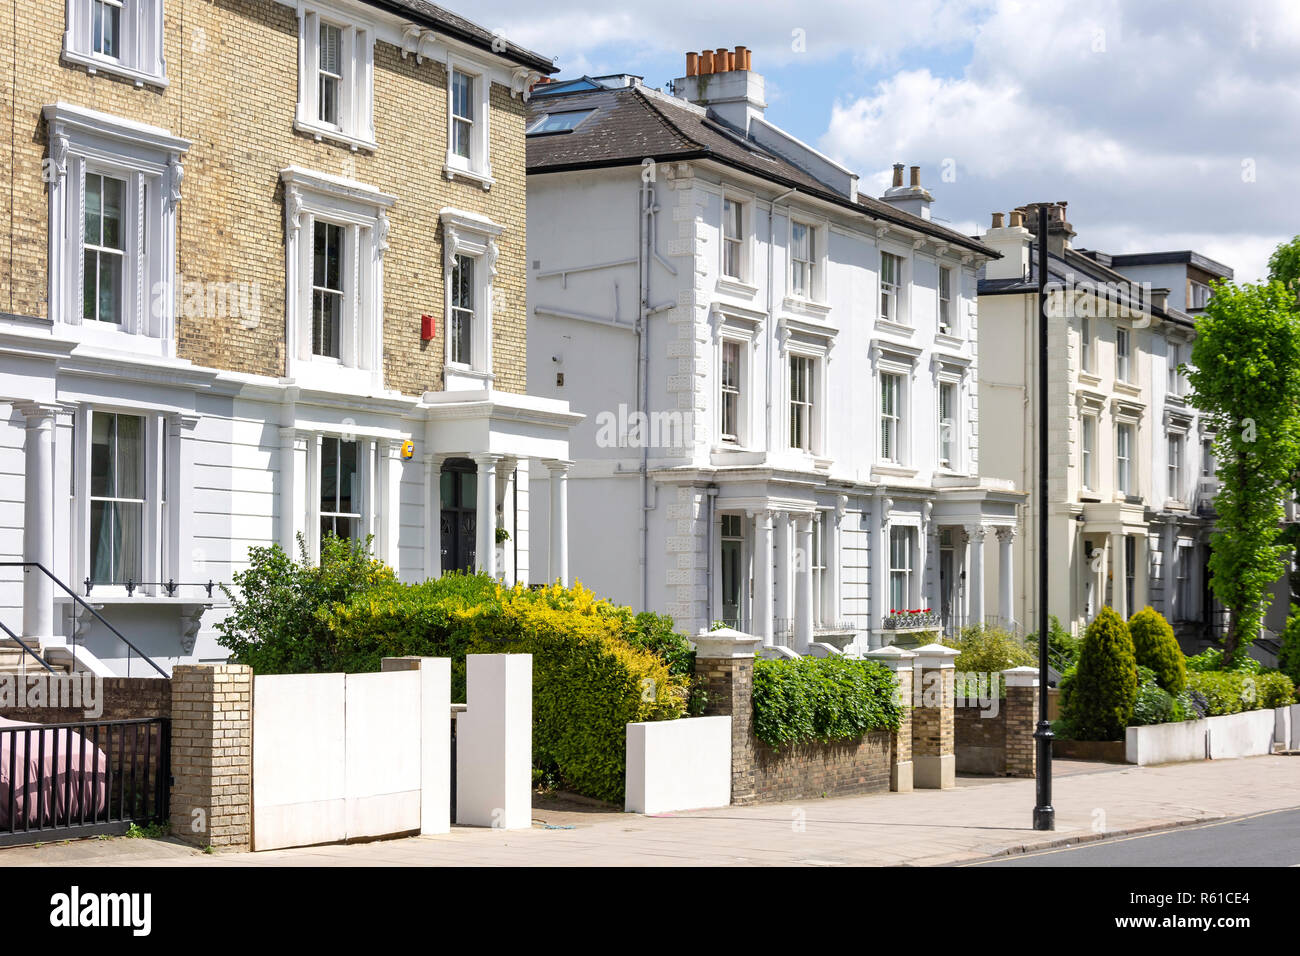 Period properties, Haverstock Hill, Belsize Park, London Borough of Camden, Greater London, England, United Kingdom Stock Photo